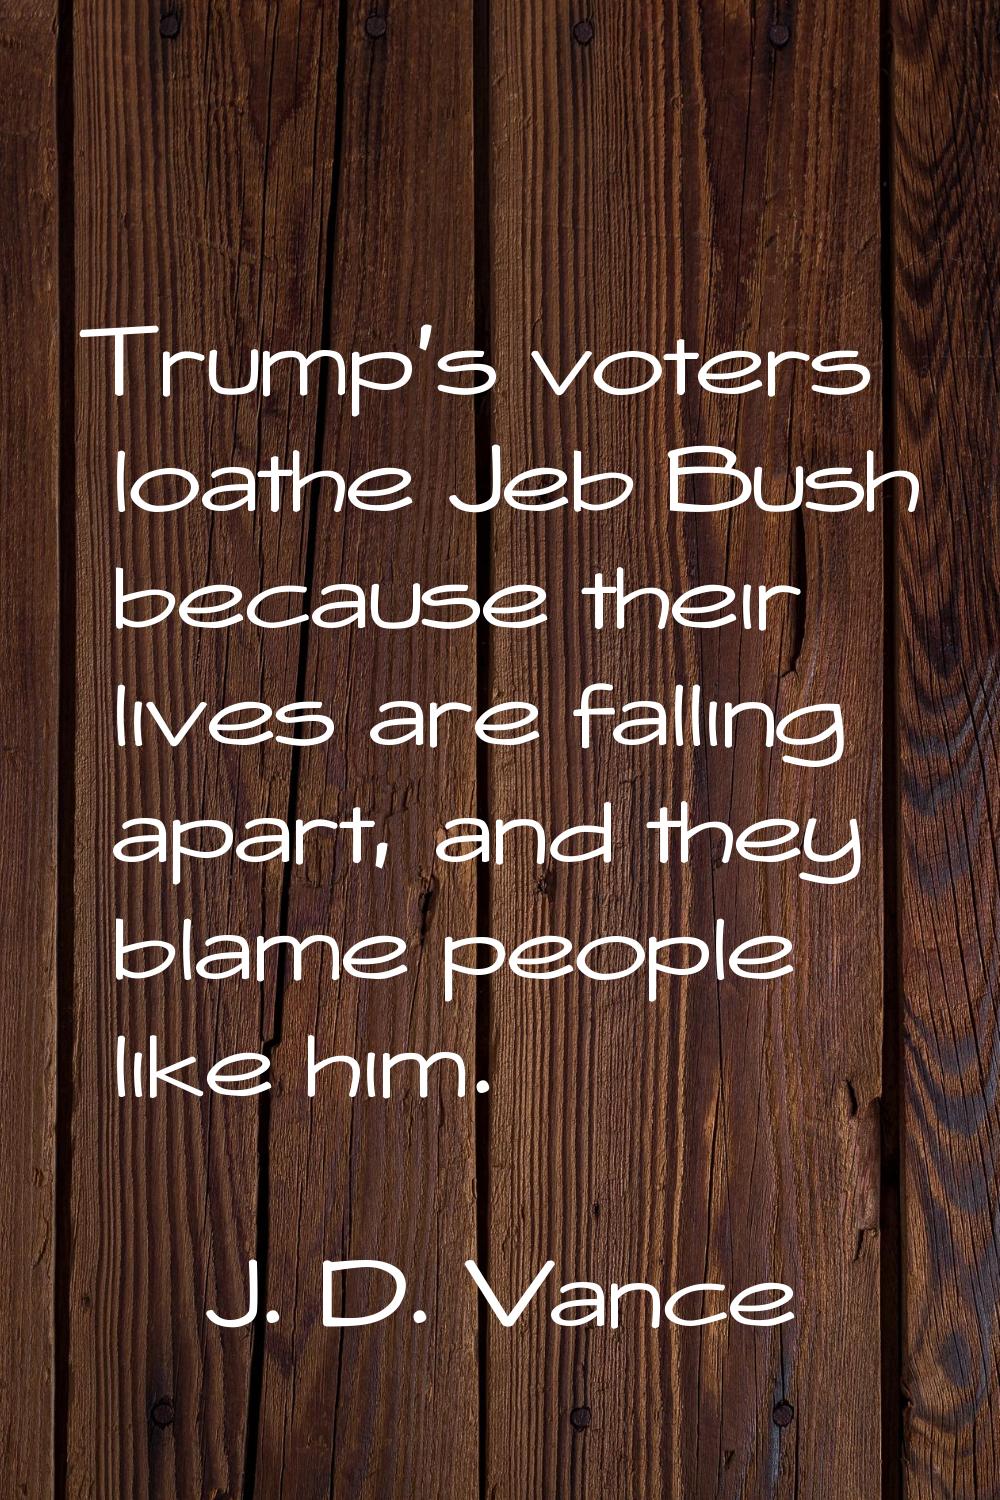 Trump's voters loathe Jeb Bush because their lives are falling apart, and they blame people like hi